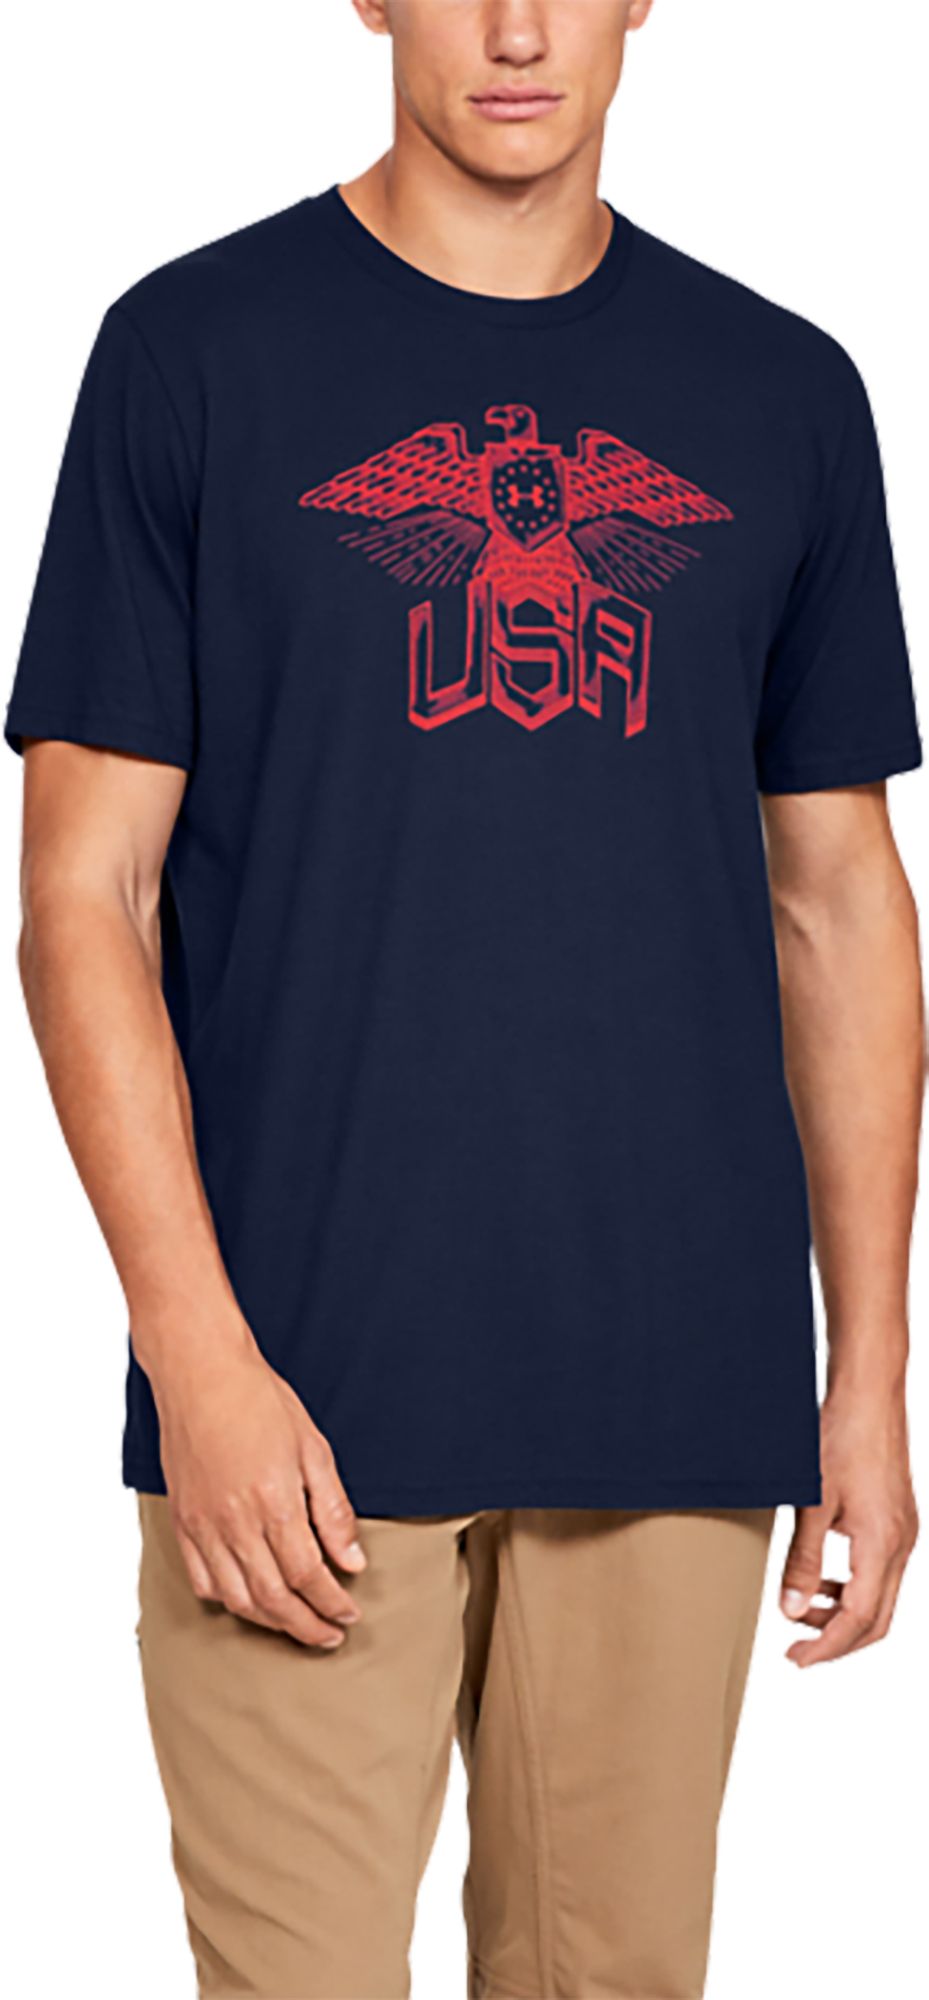 Under Armour Men's Freedom Eagle T 